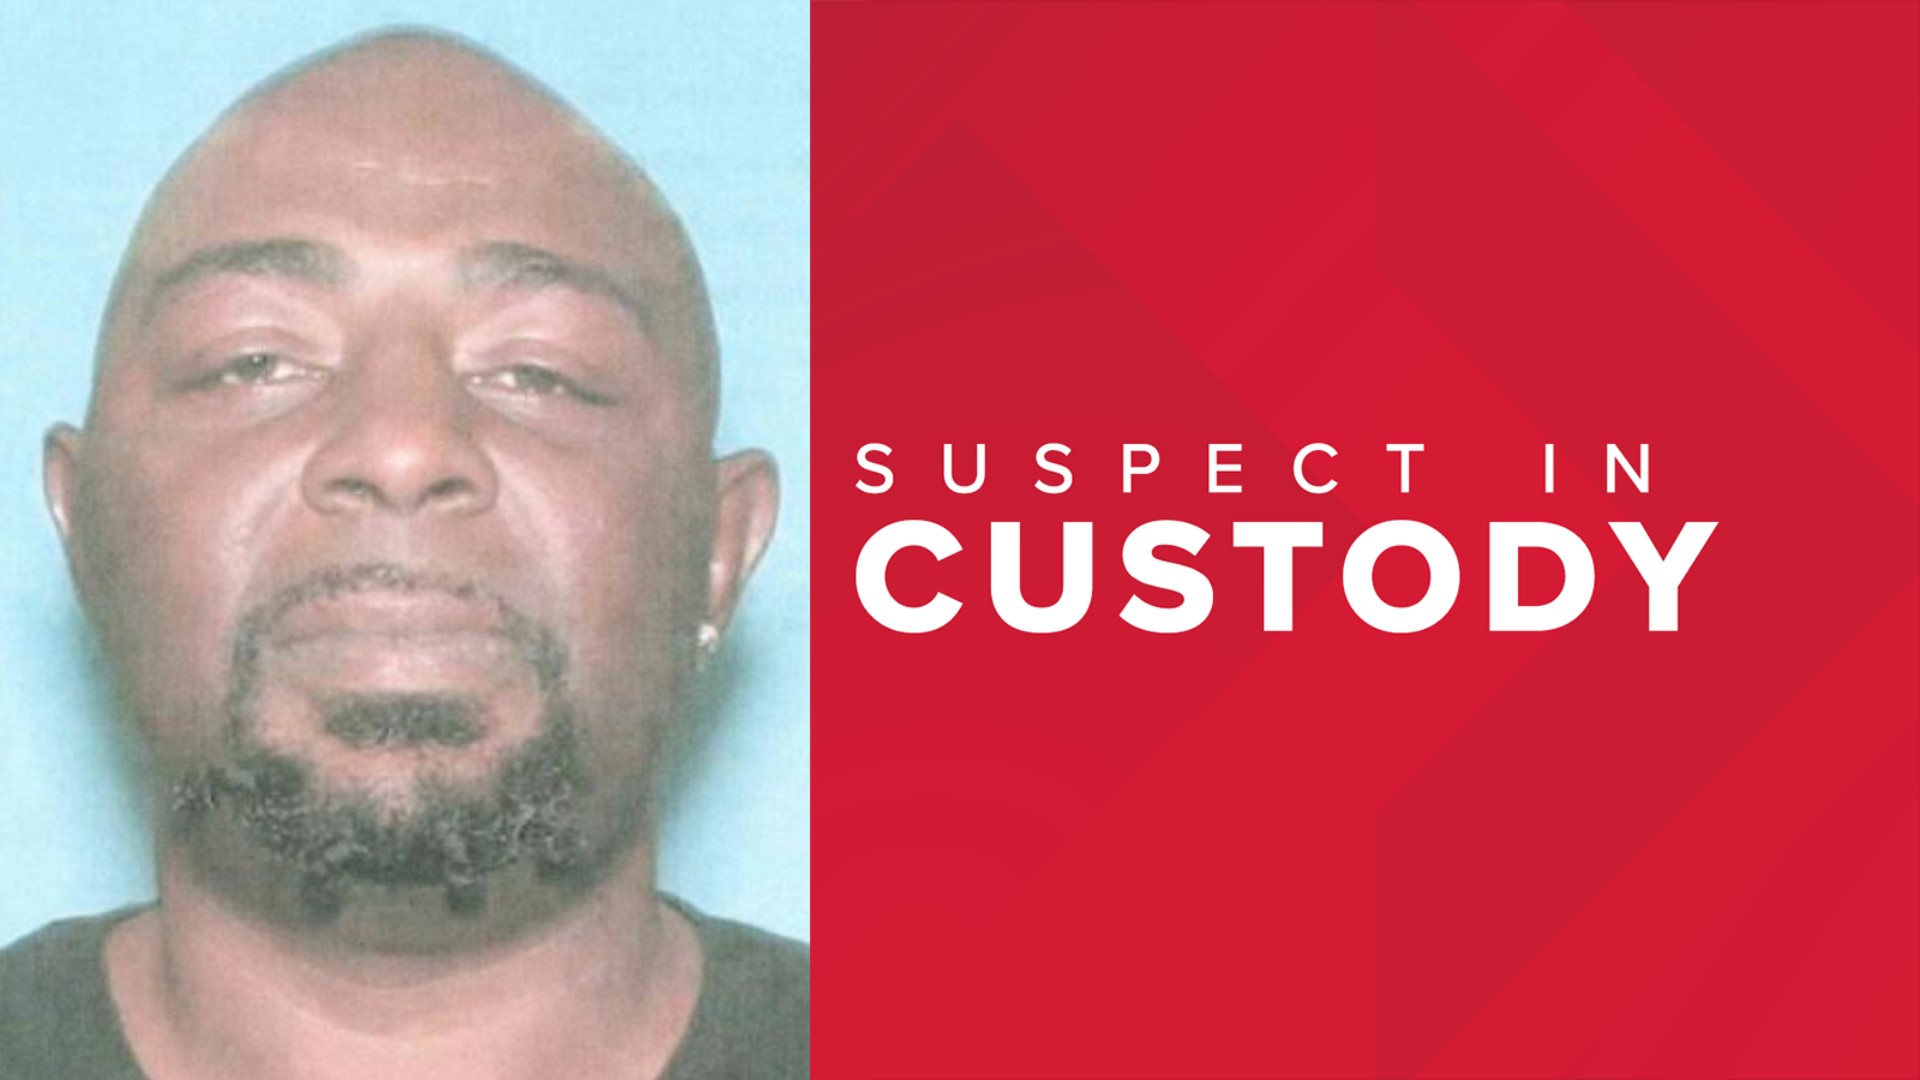 Chance Anthony Harrison was named as a suspect in the murder of Emma Jones, who died after she was shot in Killeen. He was arrested this morning in Dallas.